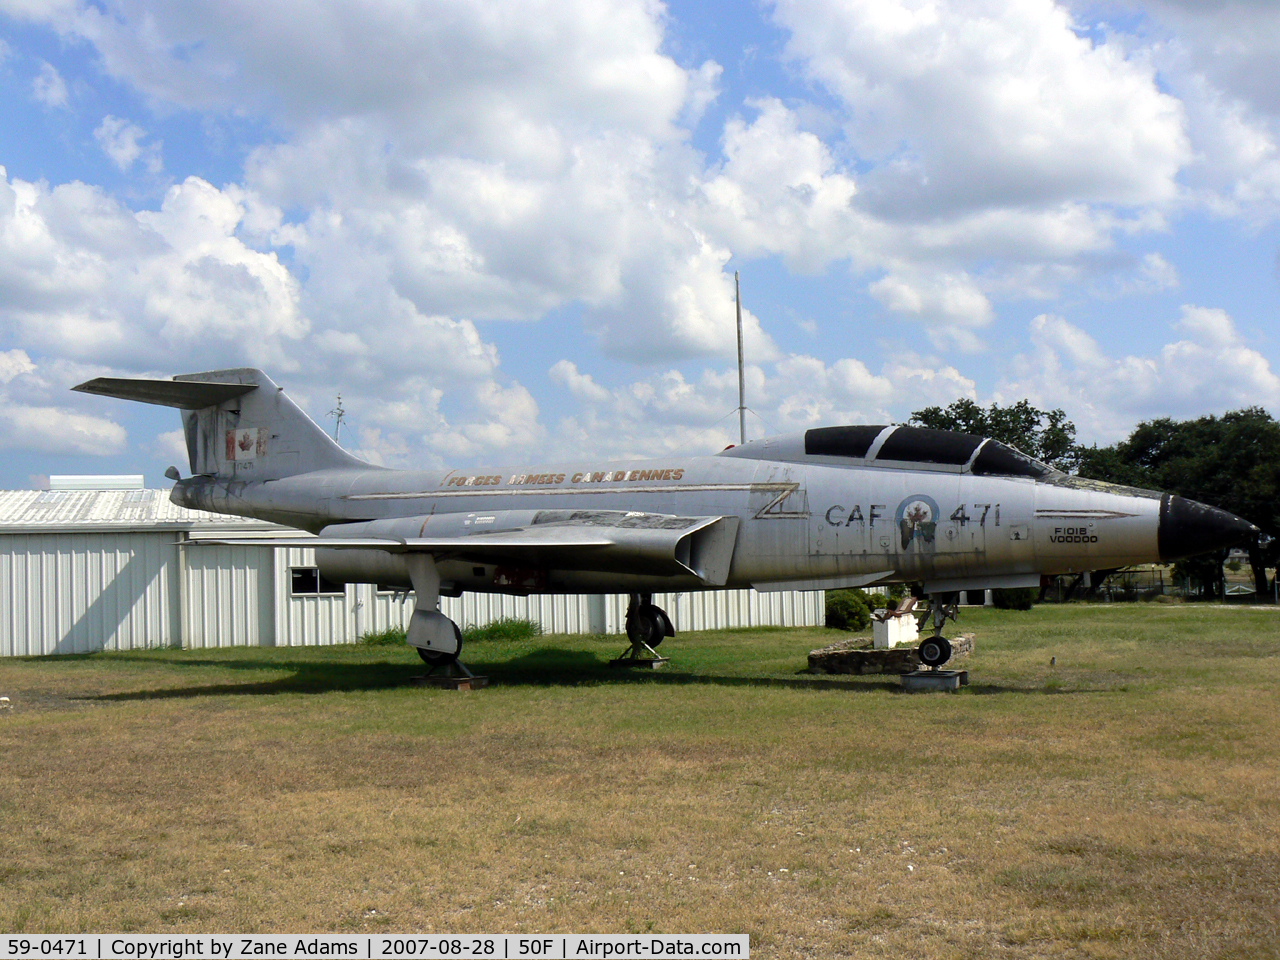 59-0471, McDonnell F-101B Voodoo C/N 795, At the Pate Museum of Transportation near Cresson, TX - This aircraft was delivered to Canada in 1961-62 as RC-101 - RCAF 17471